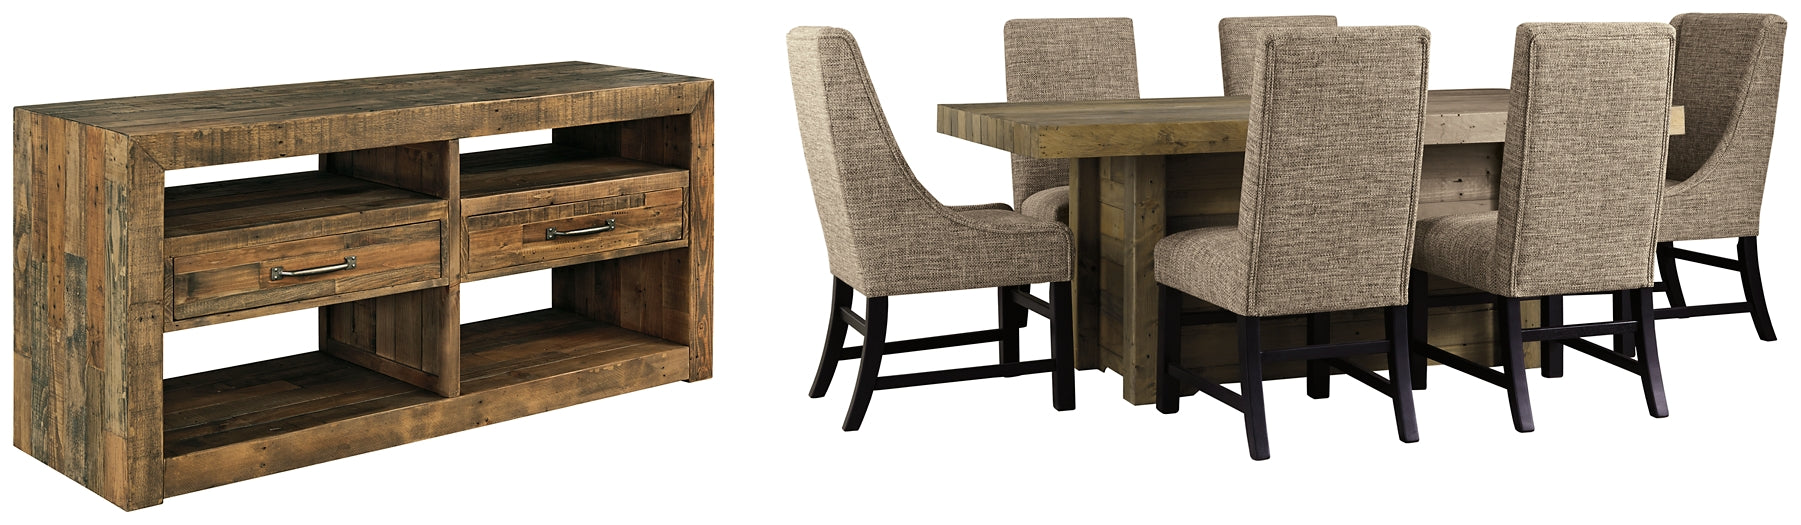 Sommerford Signature Design 8-Piece Dining Room Package